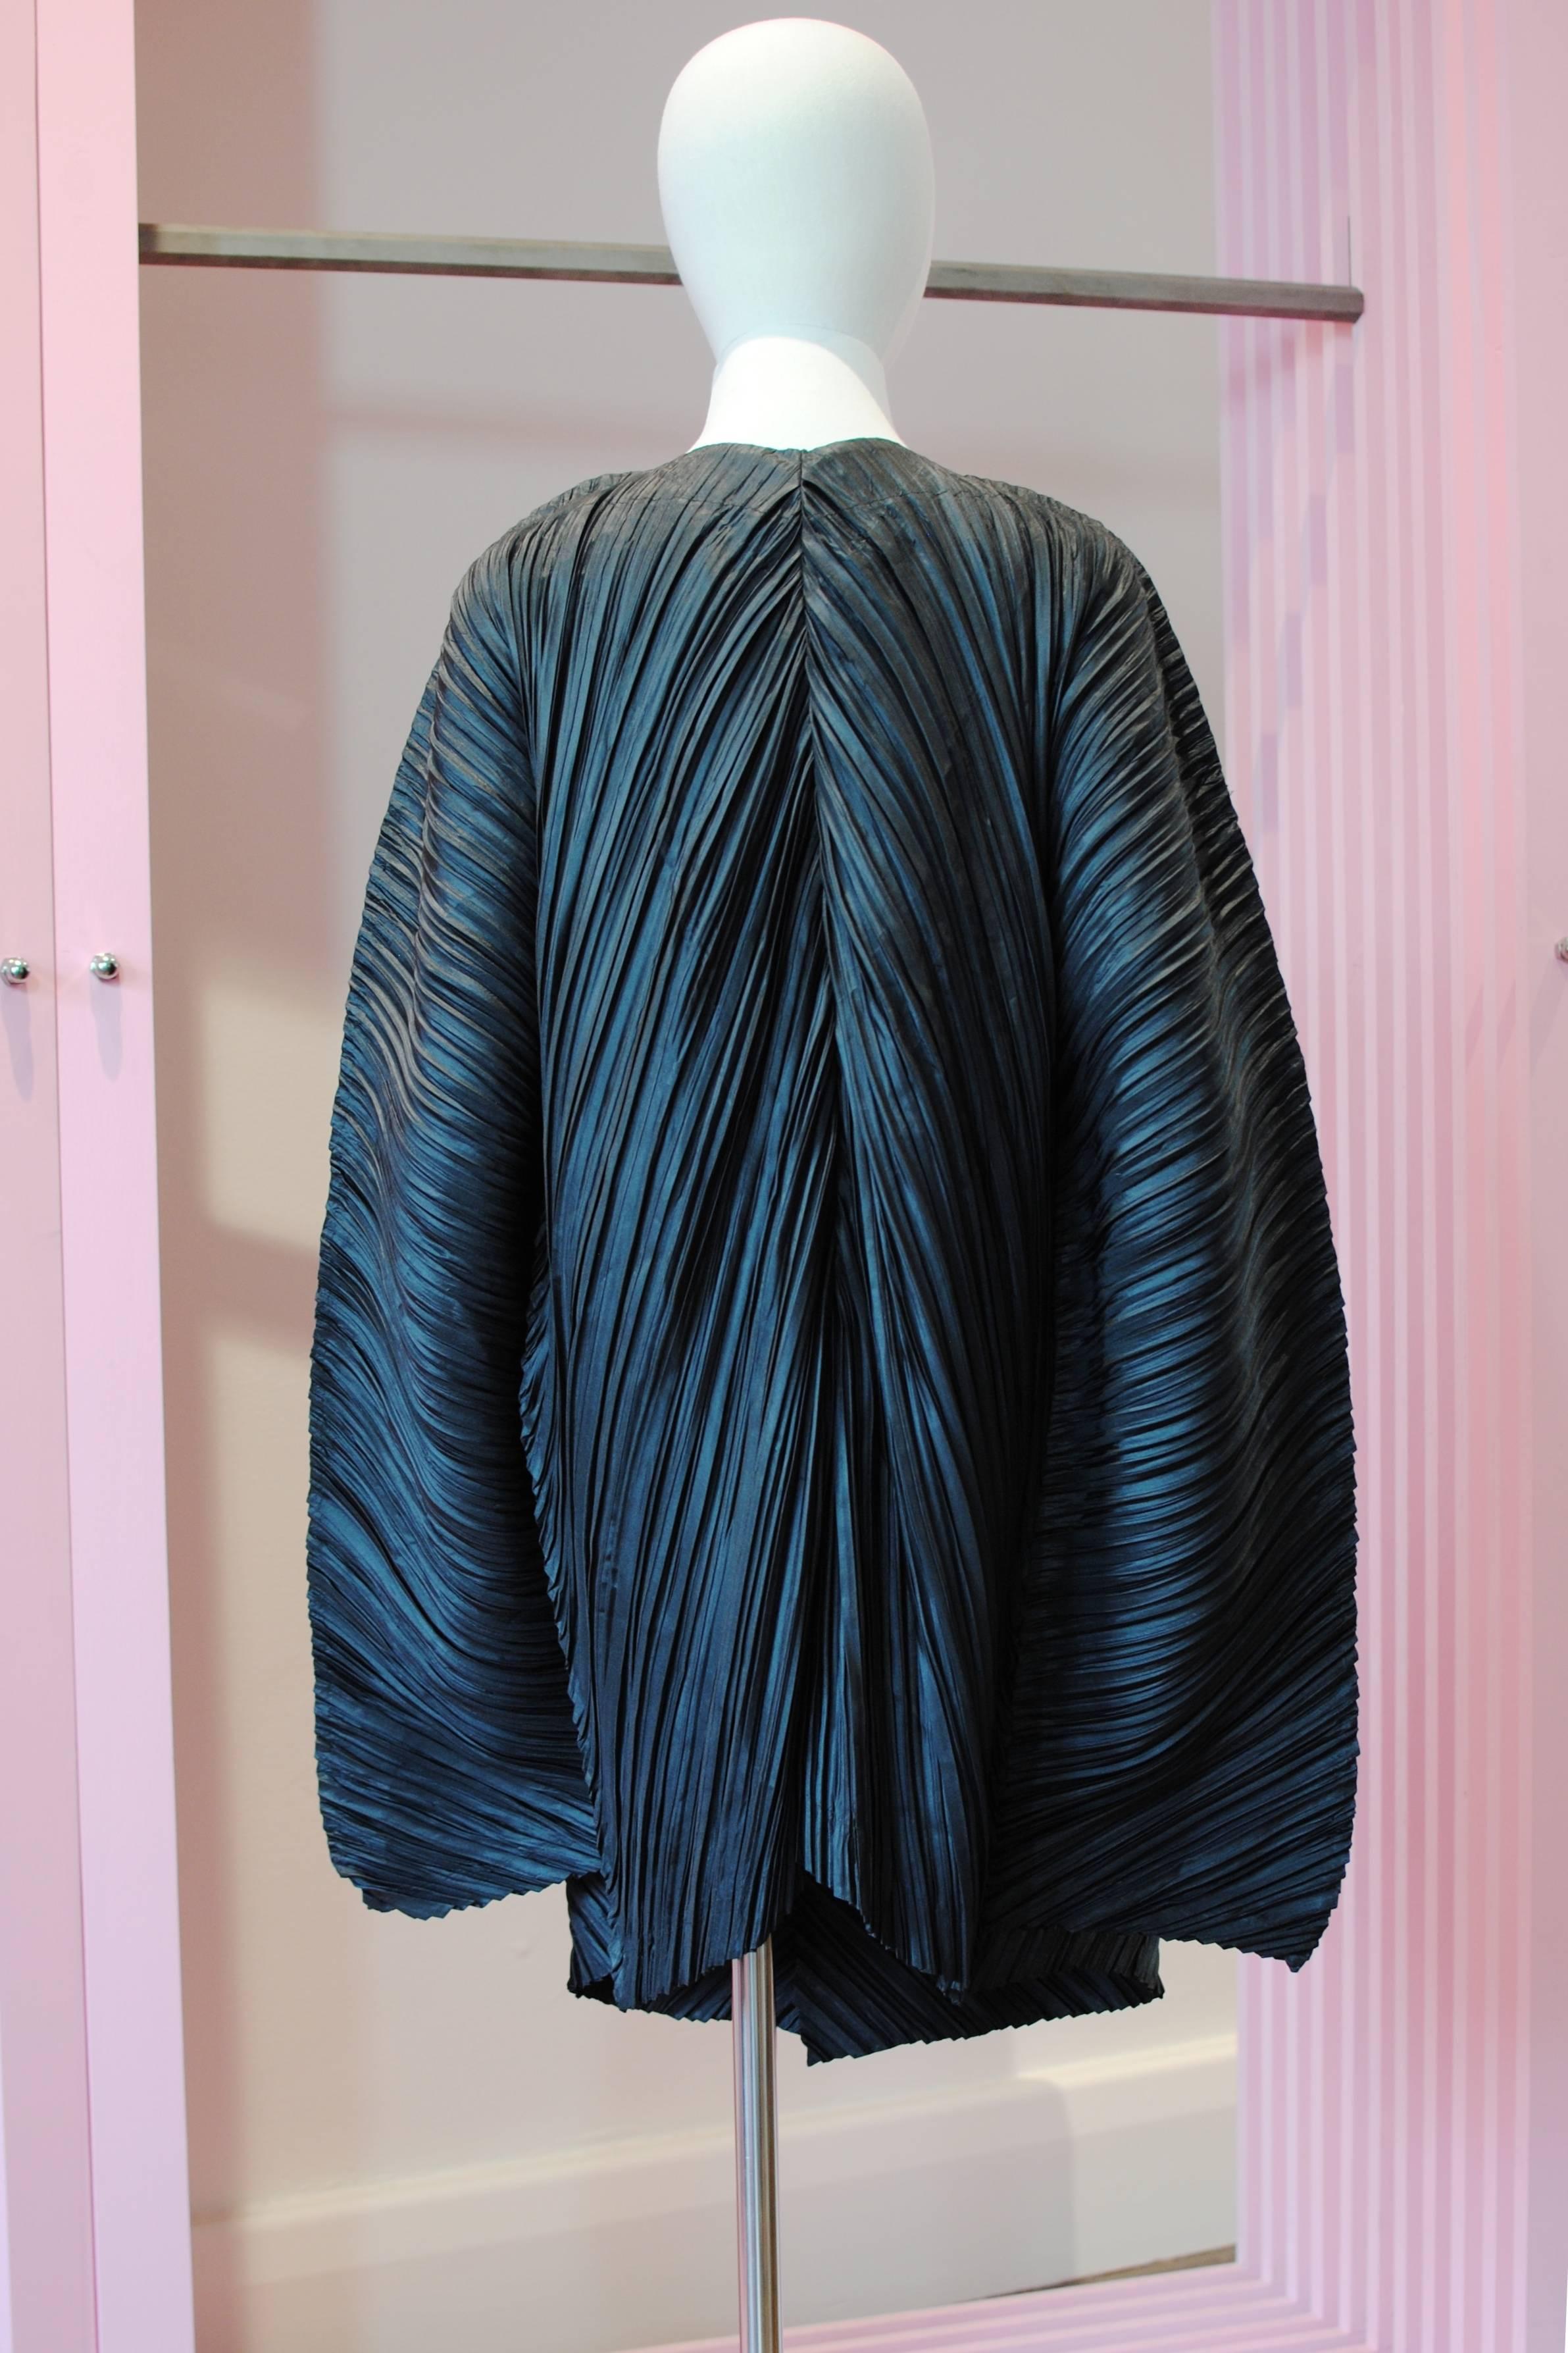 1997 Issey Miyake black oversized pleated coat In Excellent Condition For Sale In Melbourne, Victoria